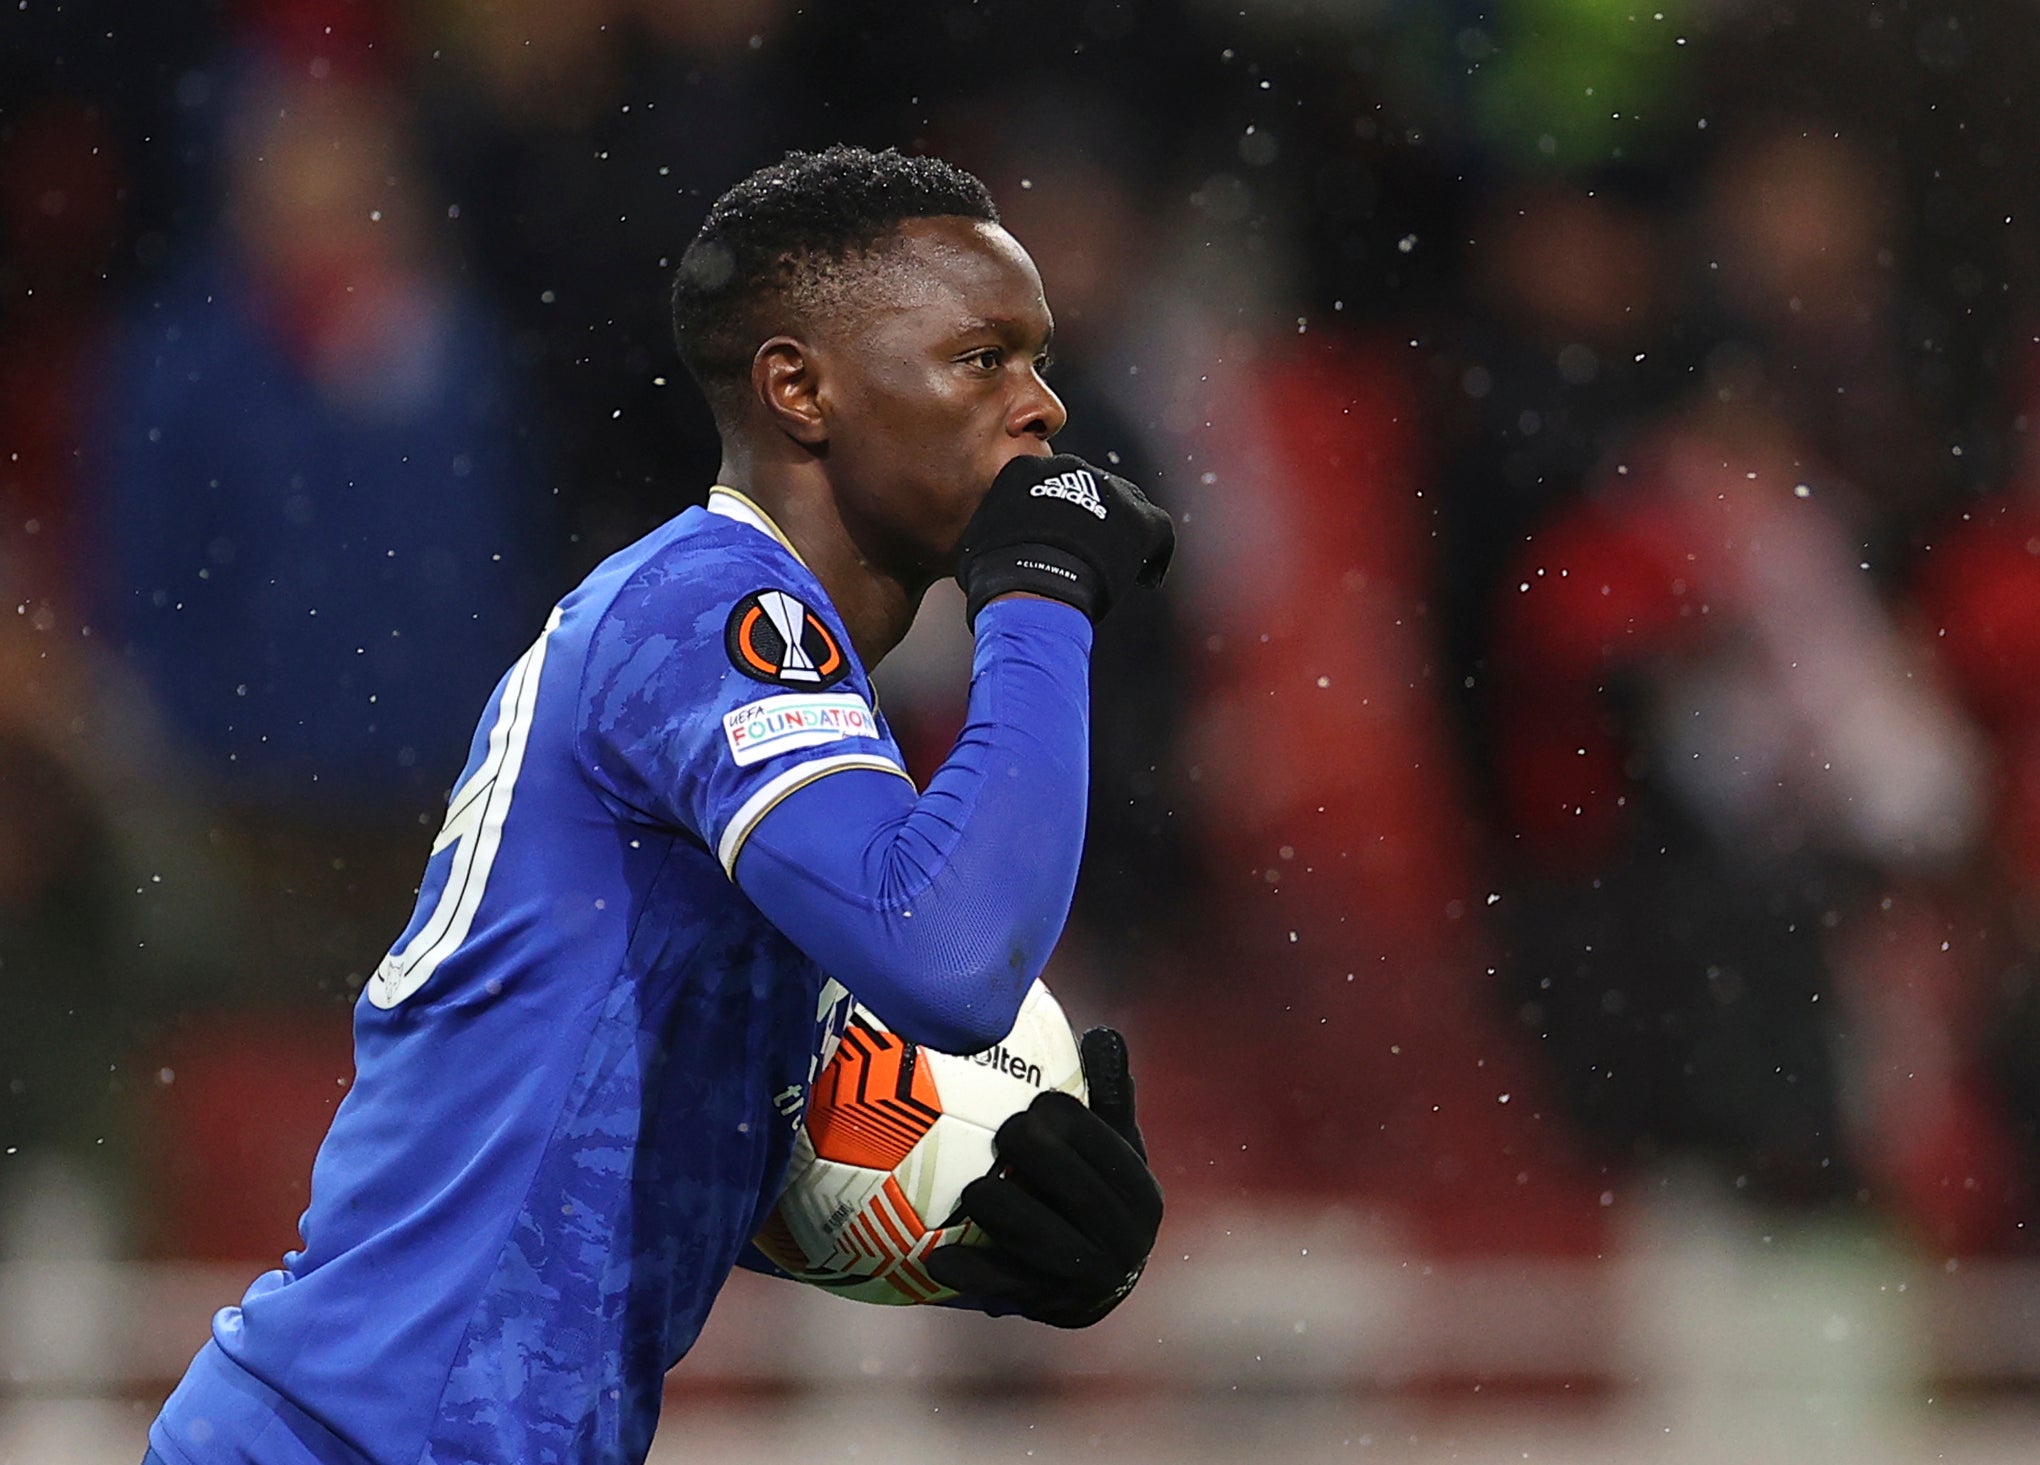 Daka scored four goals in Leicester’s 4-3 win at Spartak Moscow